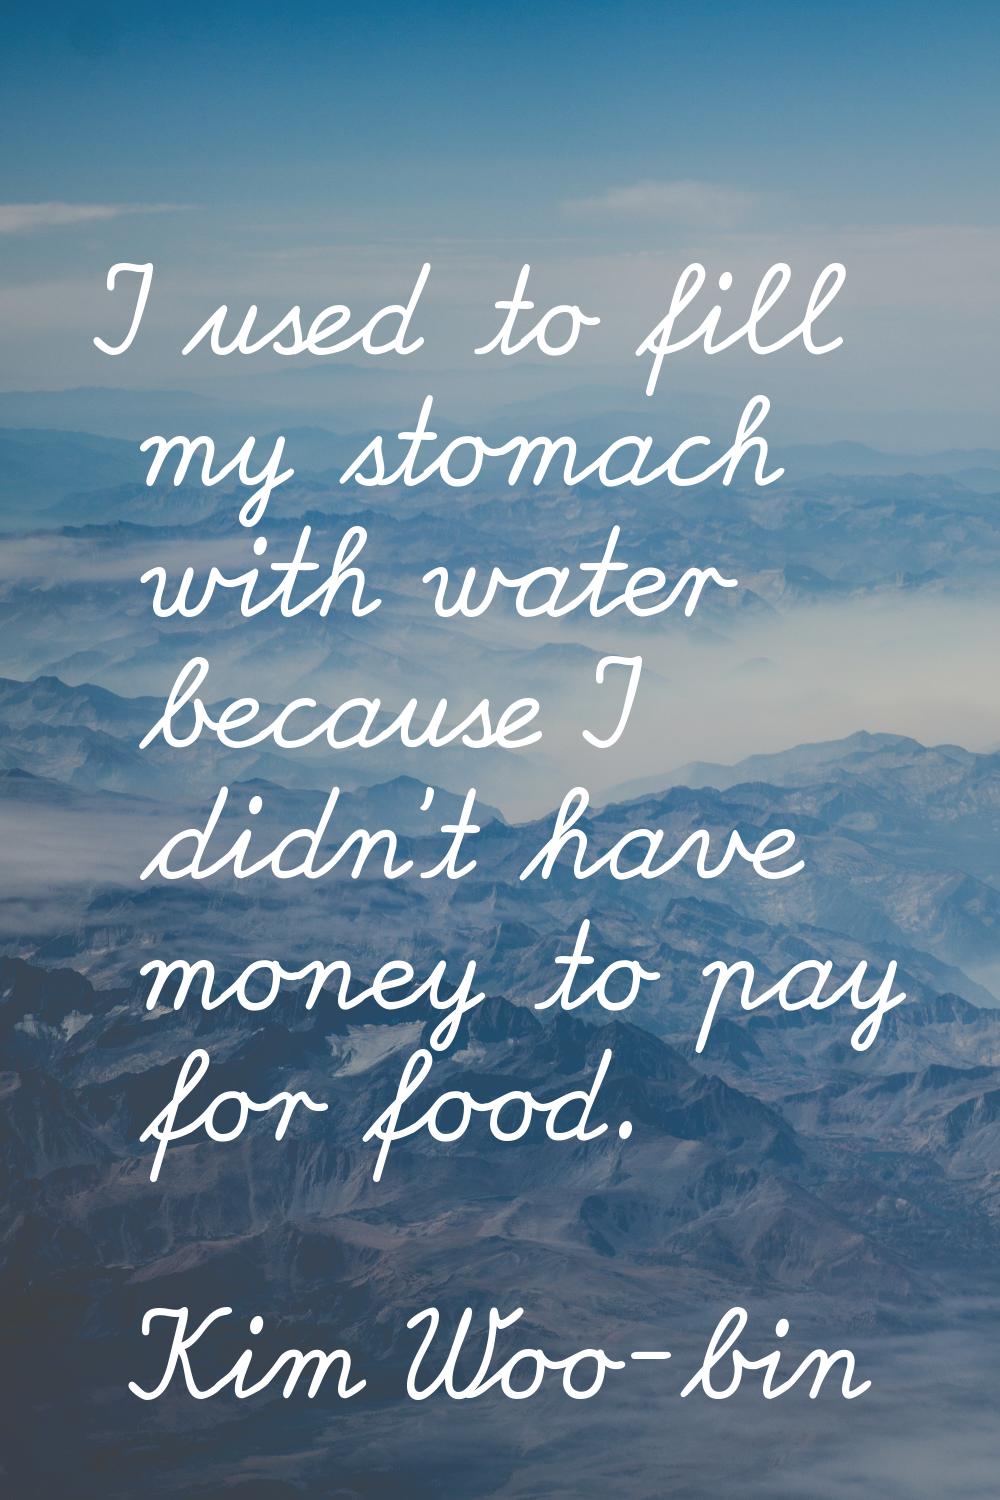 I used to fill my stomach with water because I didn't have money to pay for food.